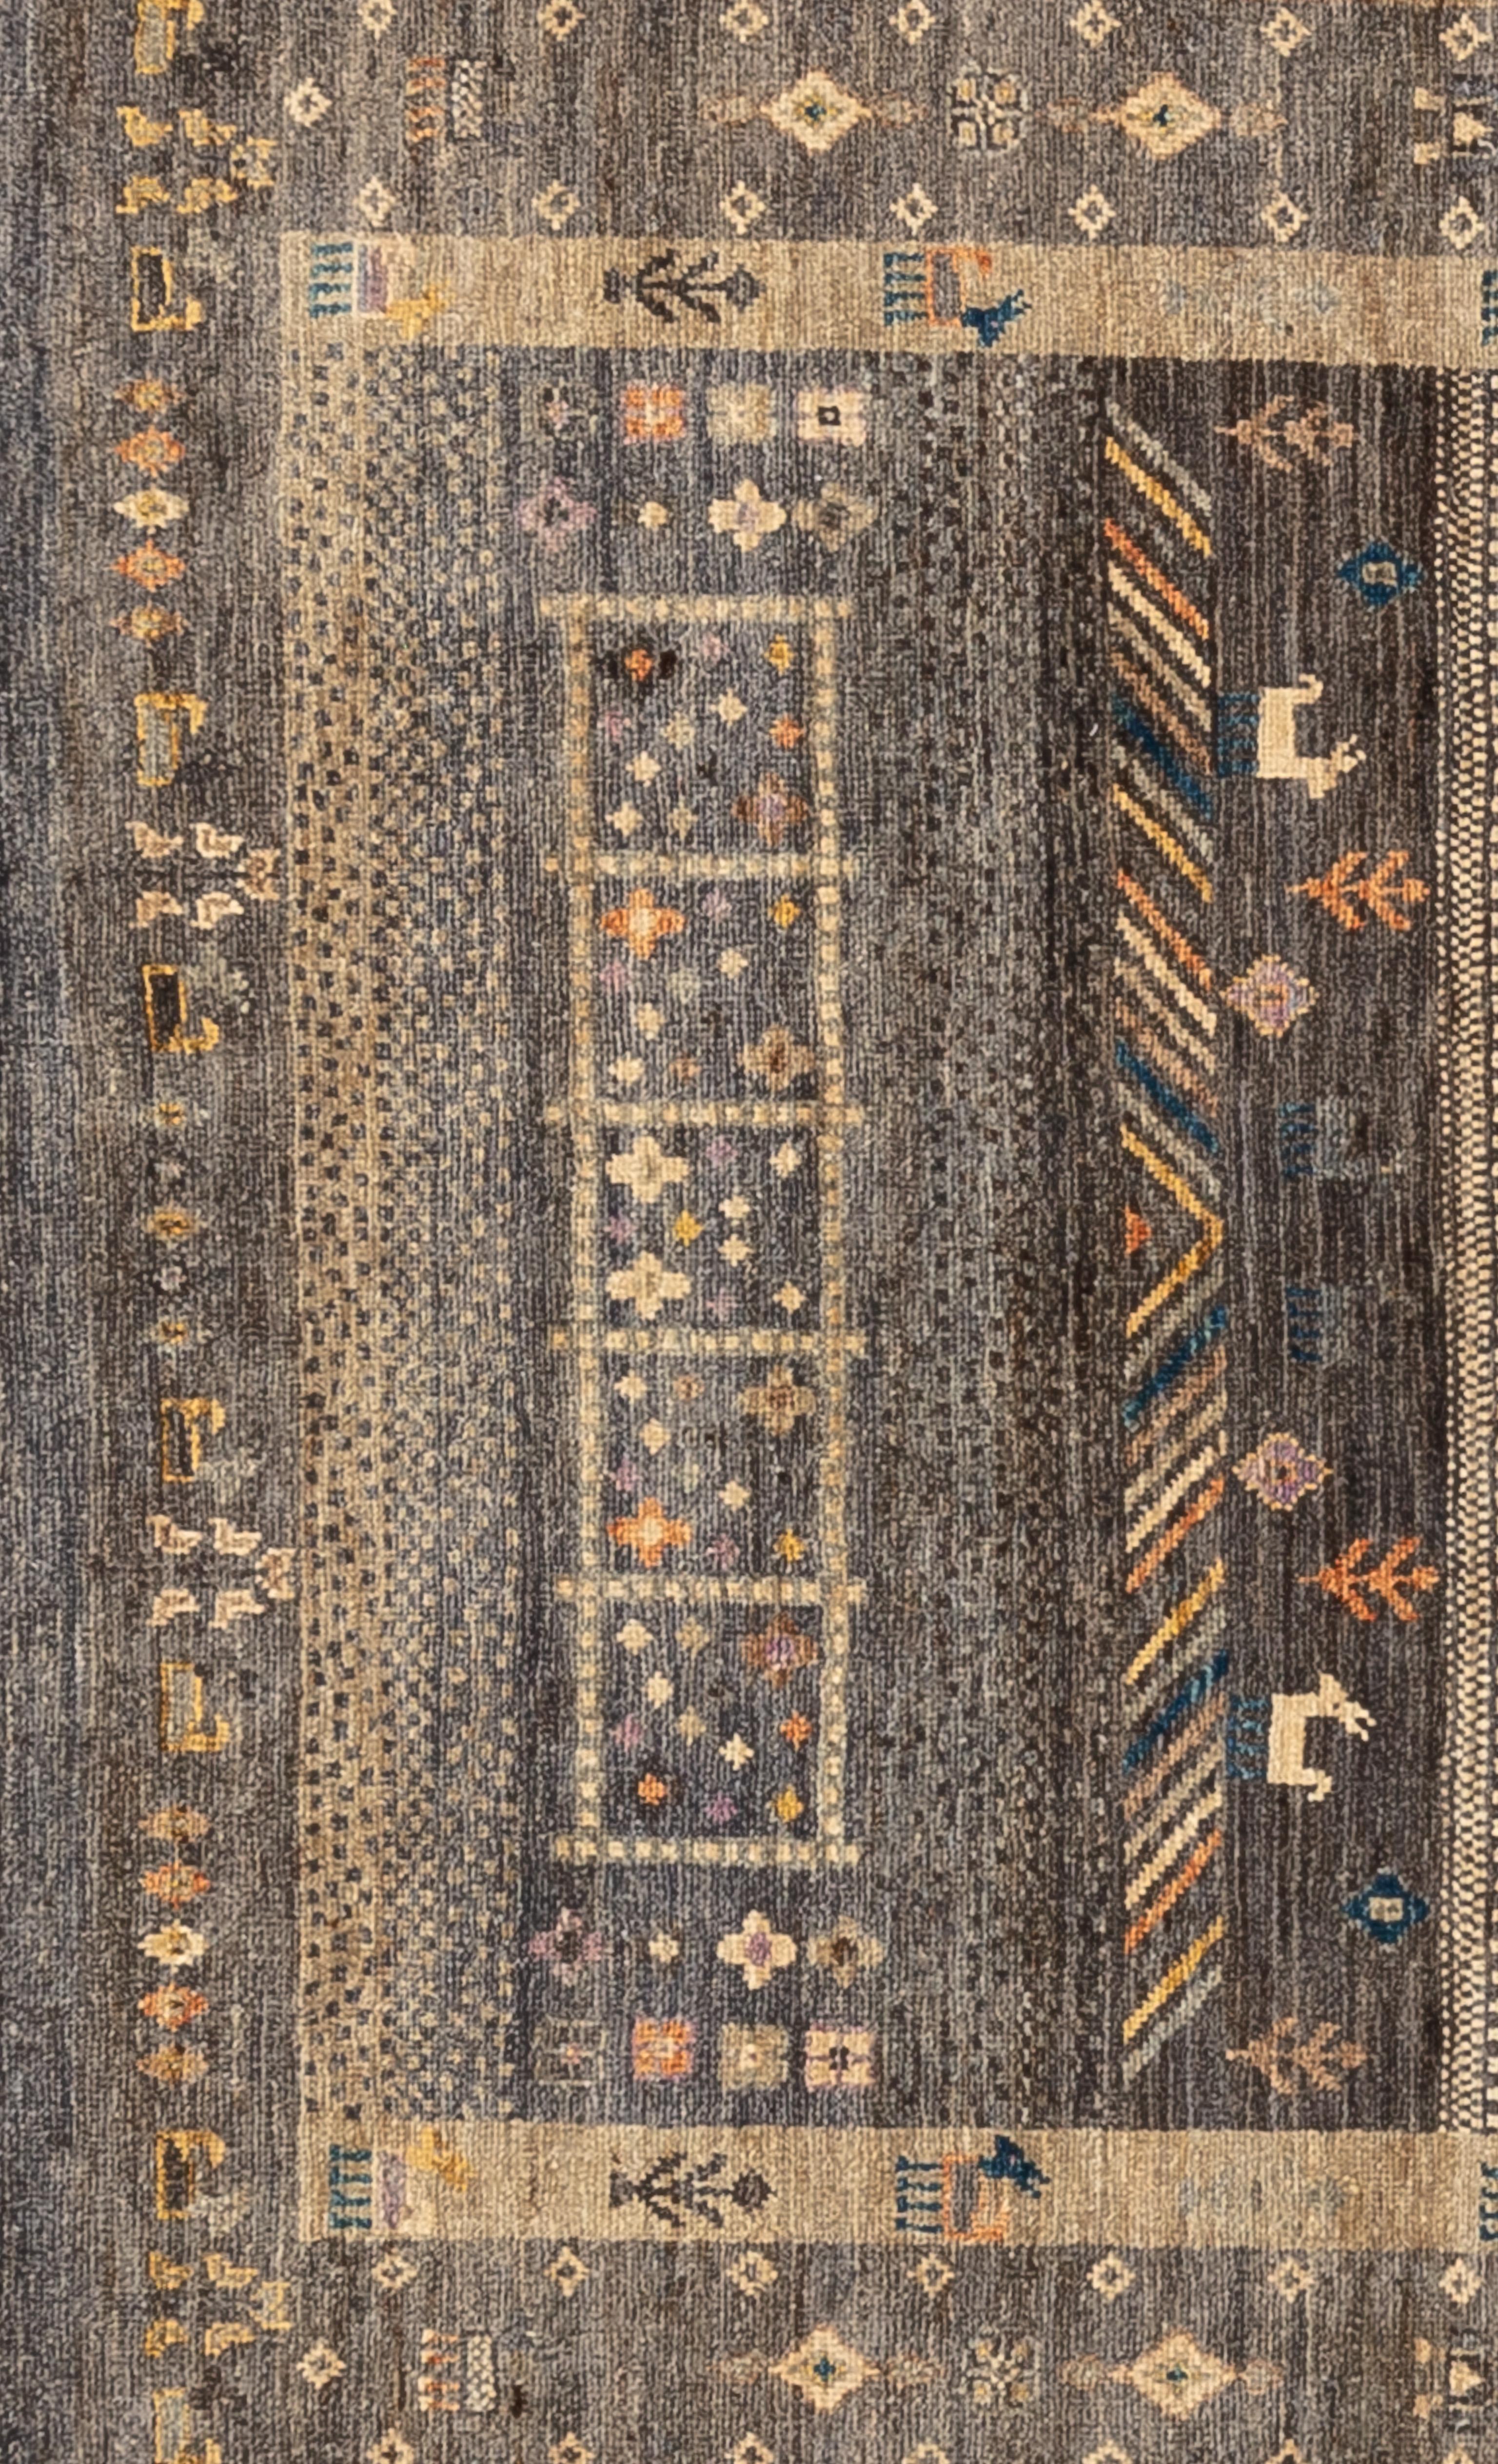 This unique, earth-toned tribal is inspired by a gabbeh rug. Certain symbols evolved to impart love, prosperity, and good fortune to their families. Handwoven with 100% handspun wool, in the subtropical woodlands of Pakistan. 

Size - 4'4